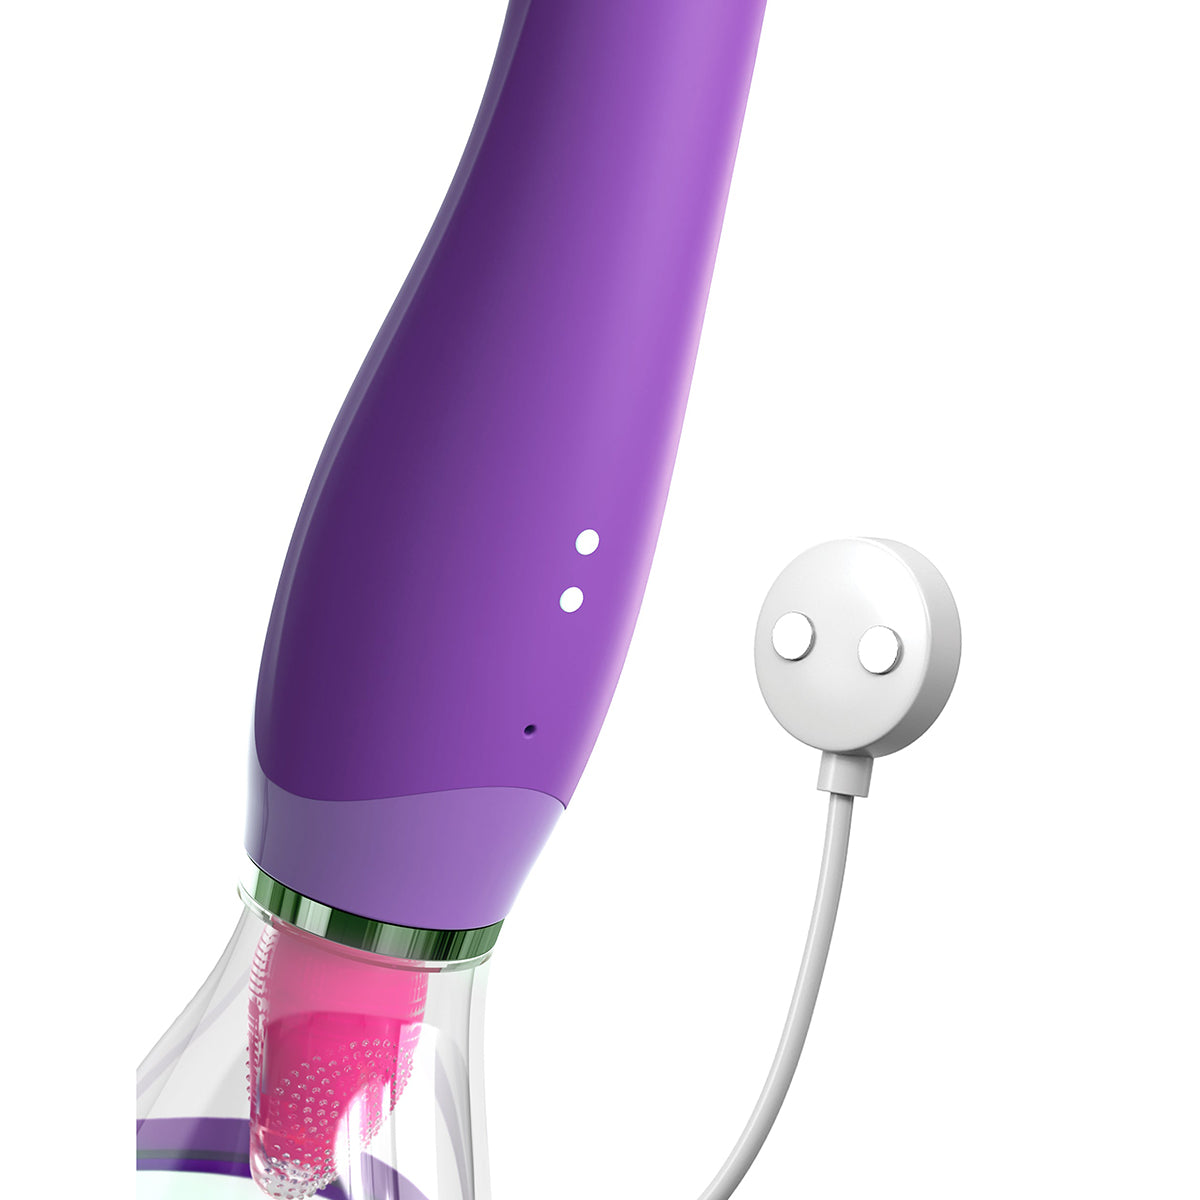 Fantasy For Her Her Ultimate Pleasure Double Ended Vibrator - Thorn & Feather